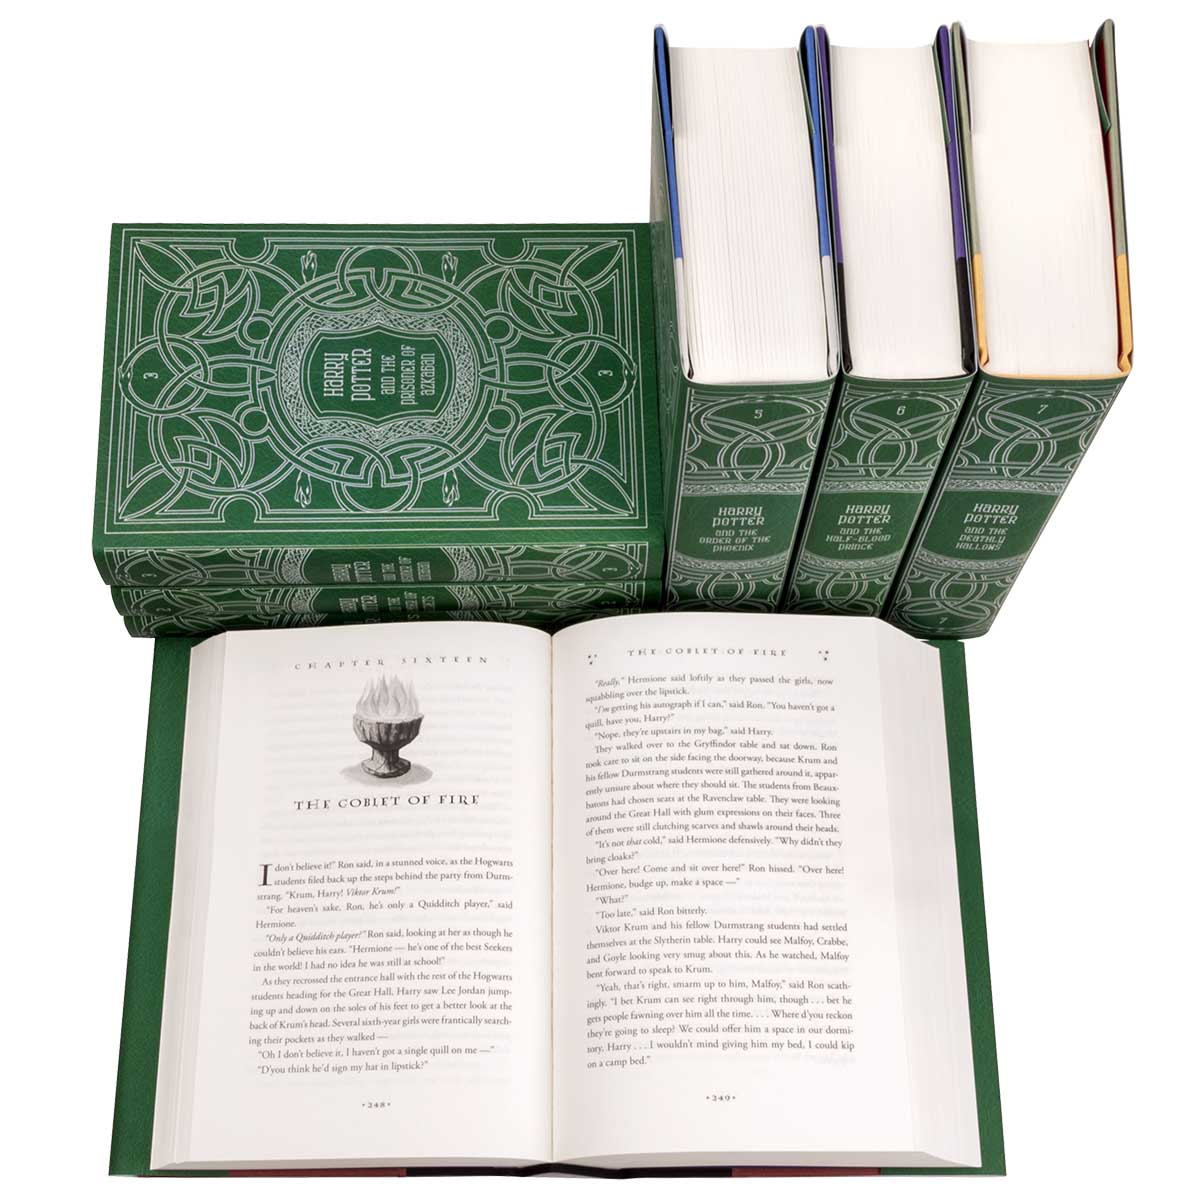 Print size of Harry Potter Slytherin book set with custom collectible green and grey dust jackets from Juniper Books.